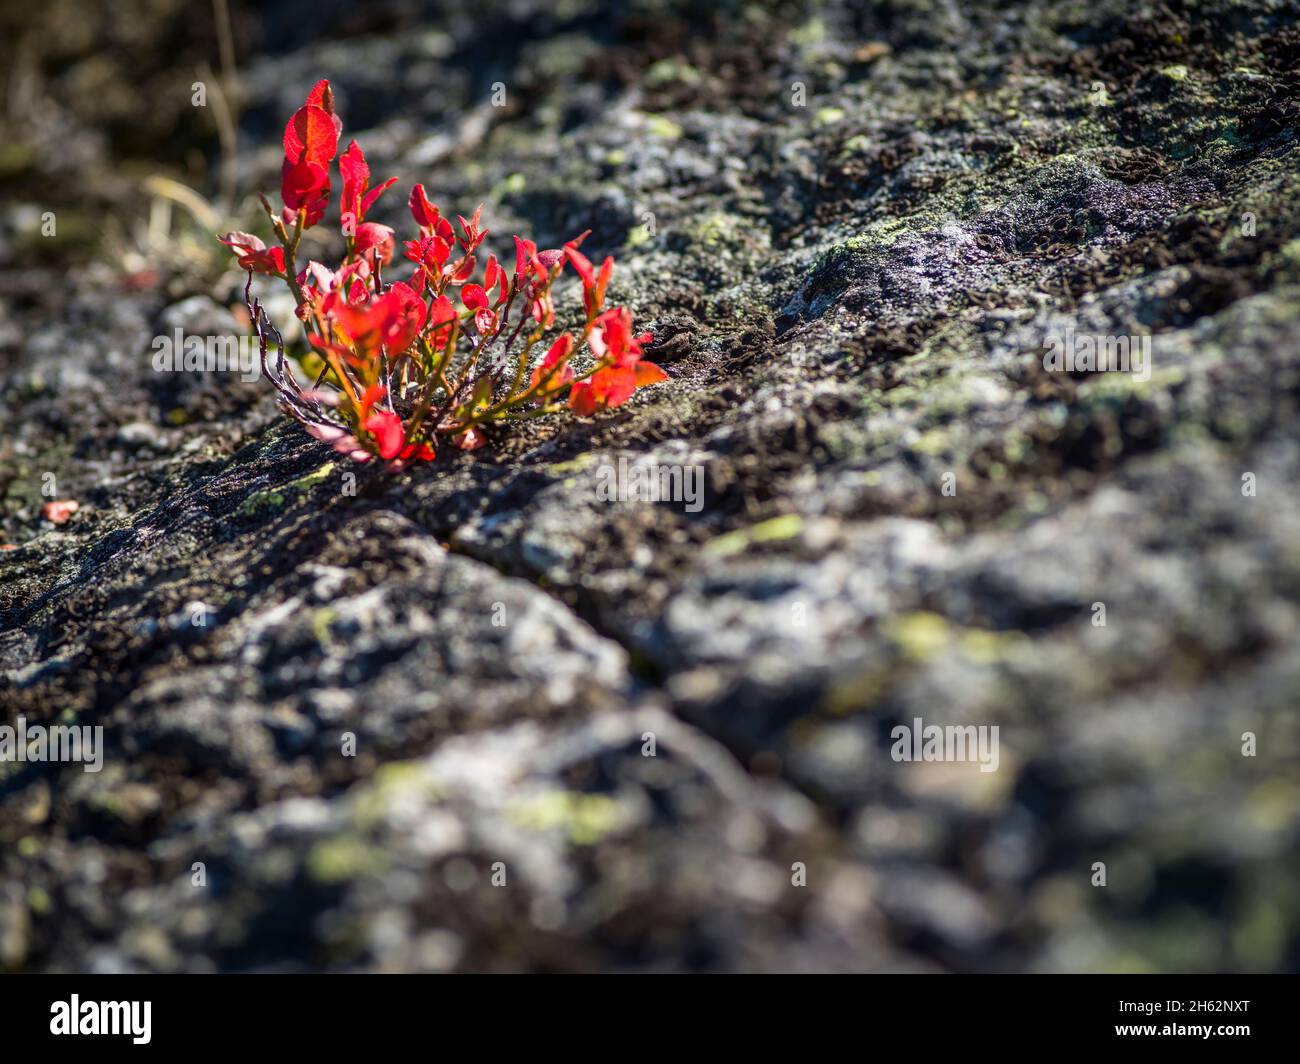 small plant with red leaves on stone Stock Photo